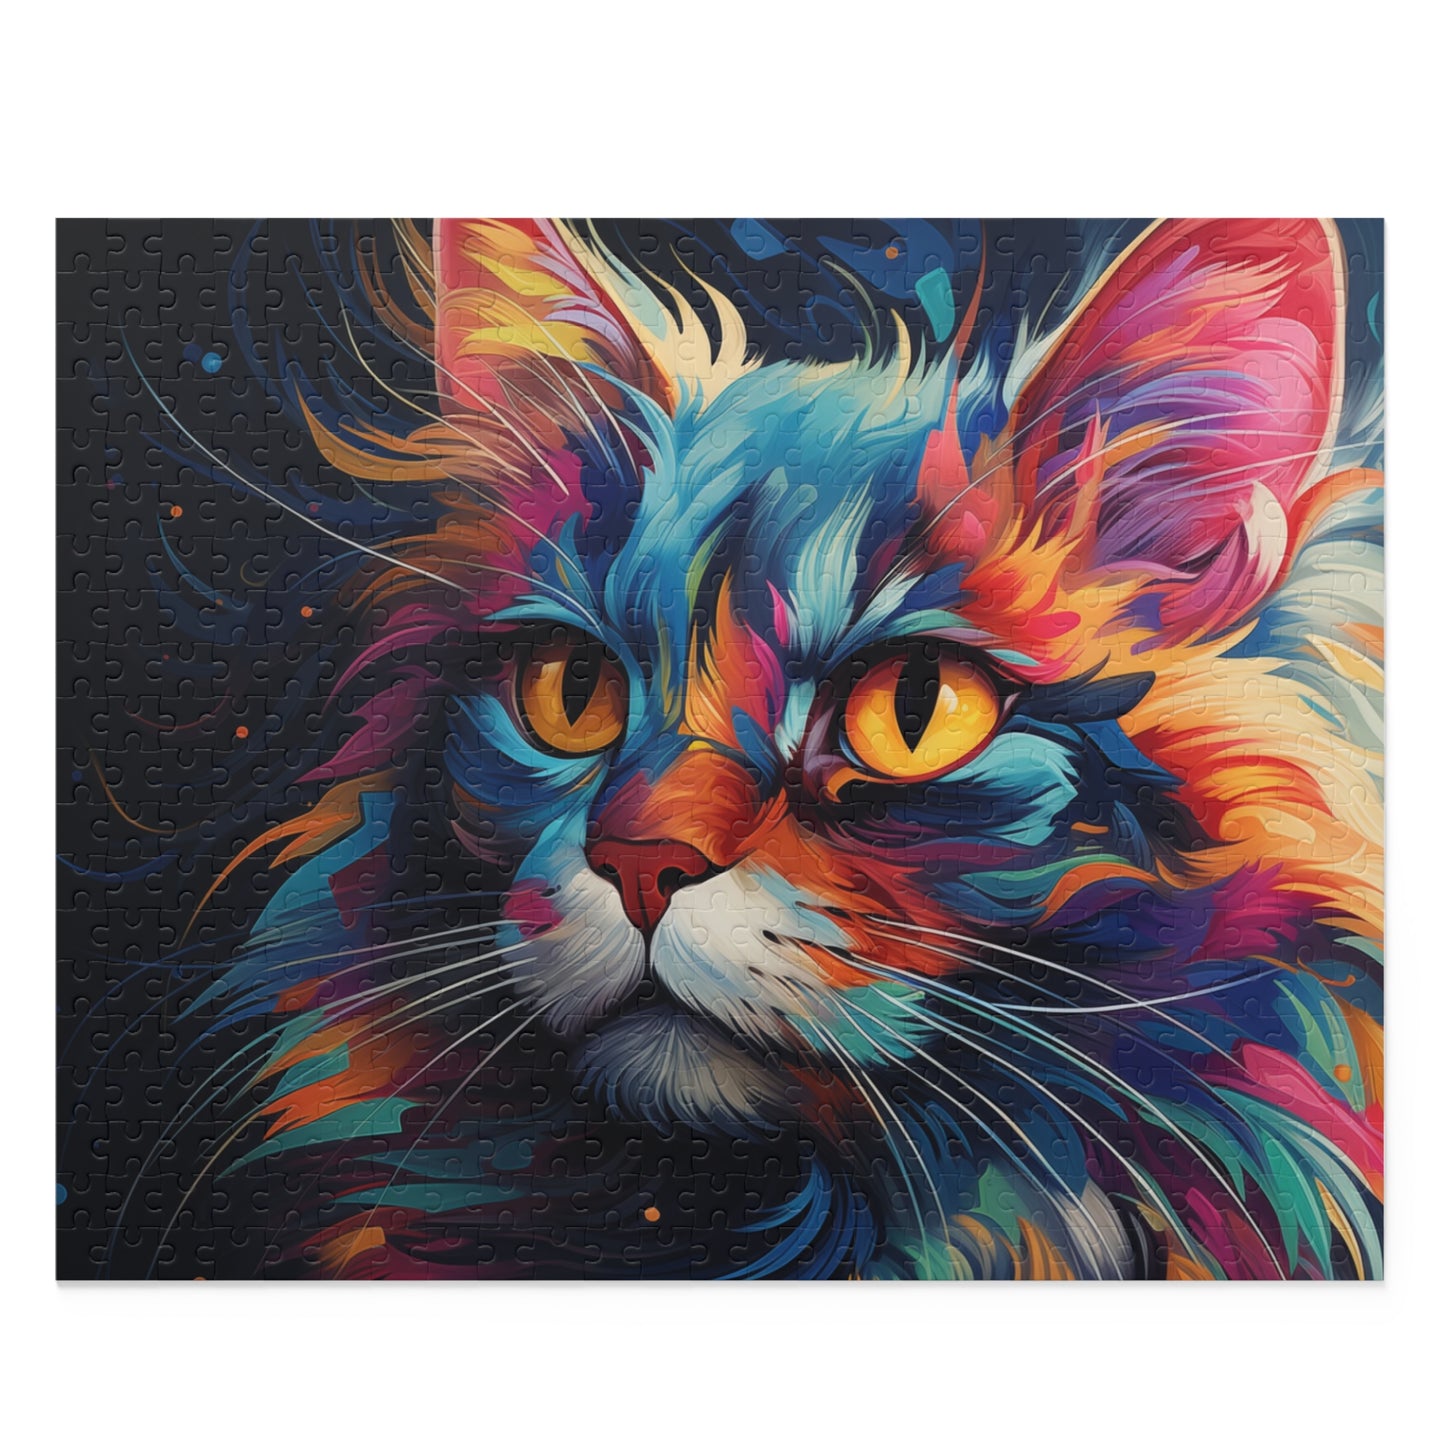 Watercolor Abstract Cat Jigsaw Puzzle for Boys, Girls, Kids Adult Birthday Business Jigsaw Puzzle Gift for Him Funny Humorous Indoor Outdoor Game Gift For Her Online-1